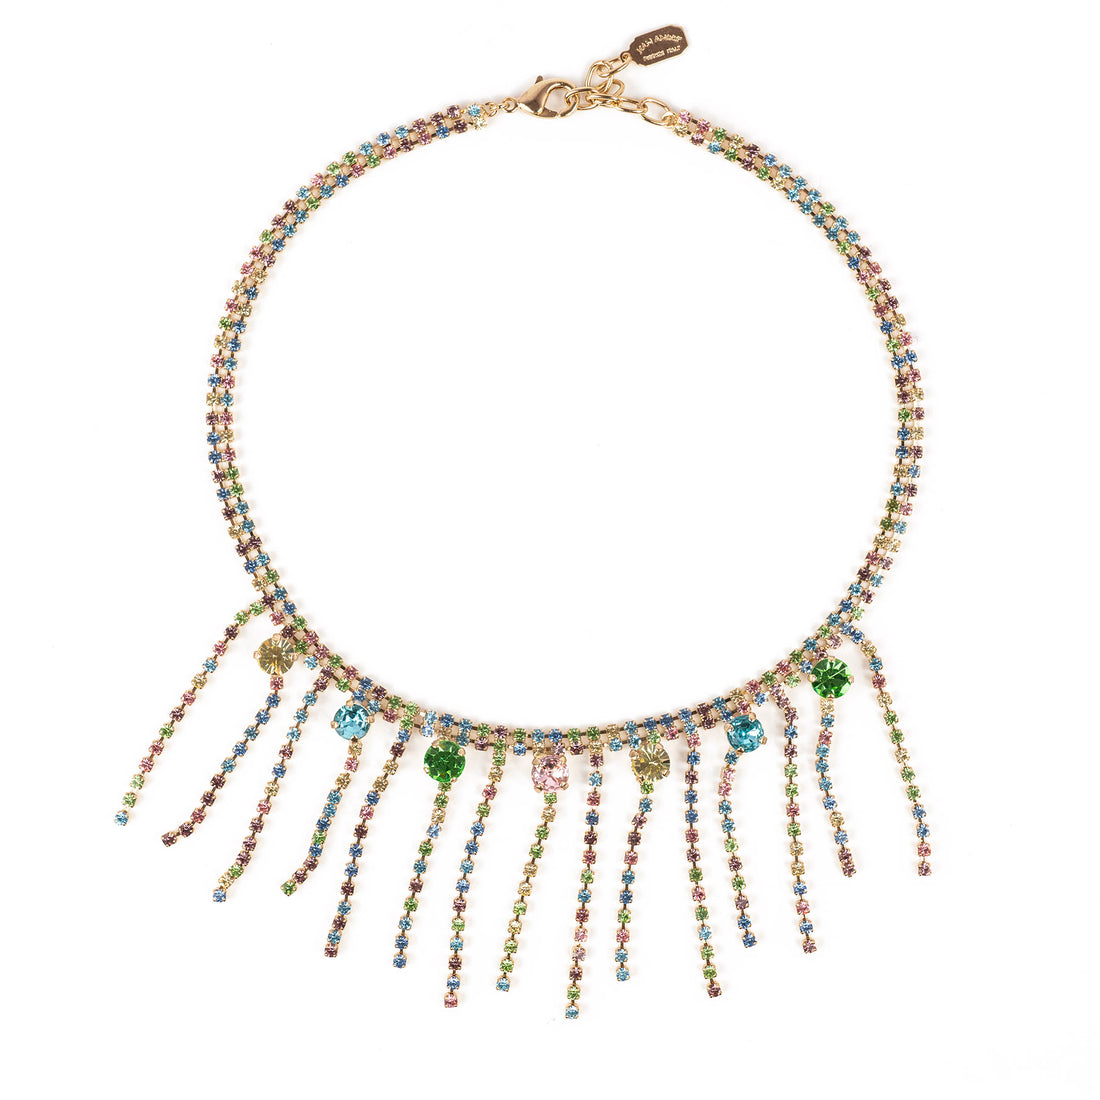 Choker necklace with multicolored crystal fringe